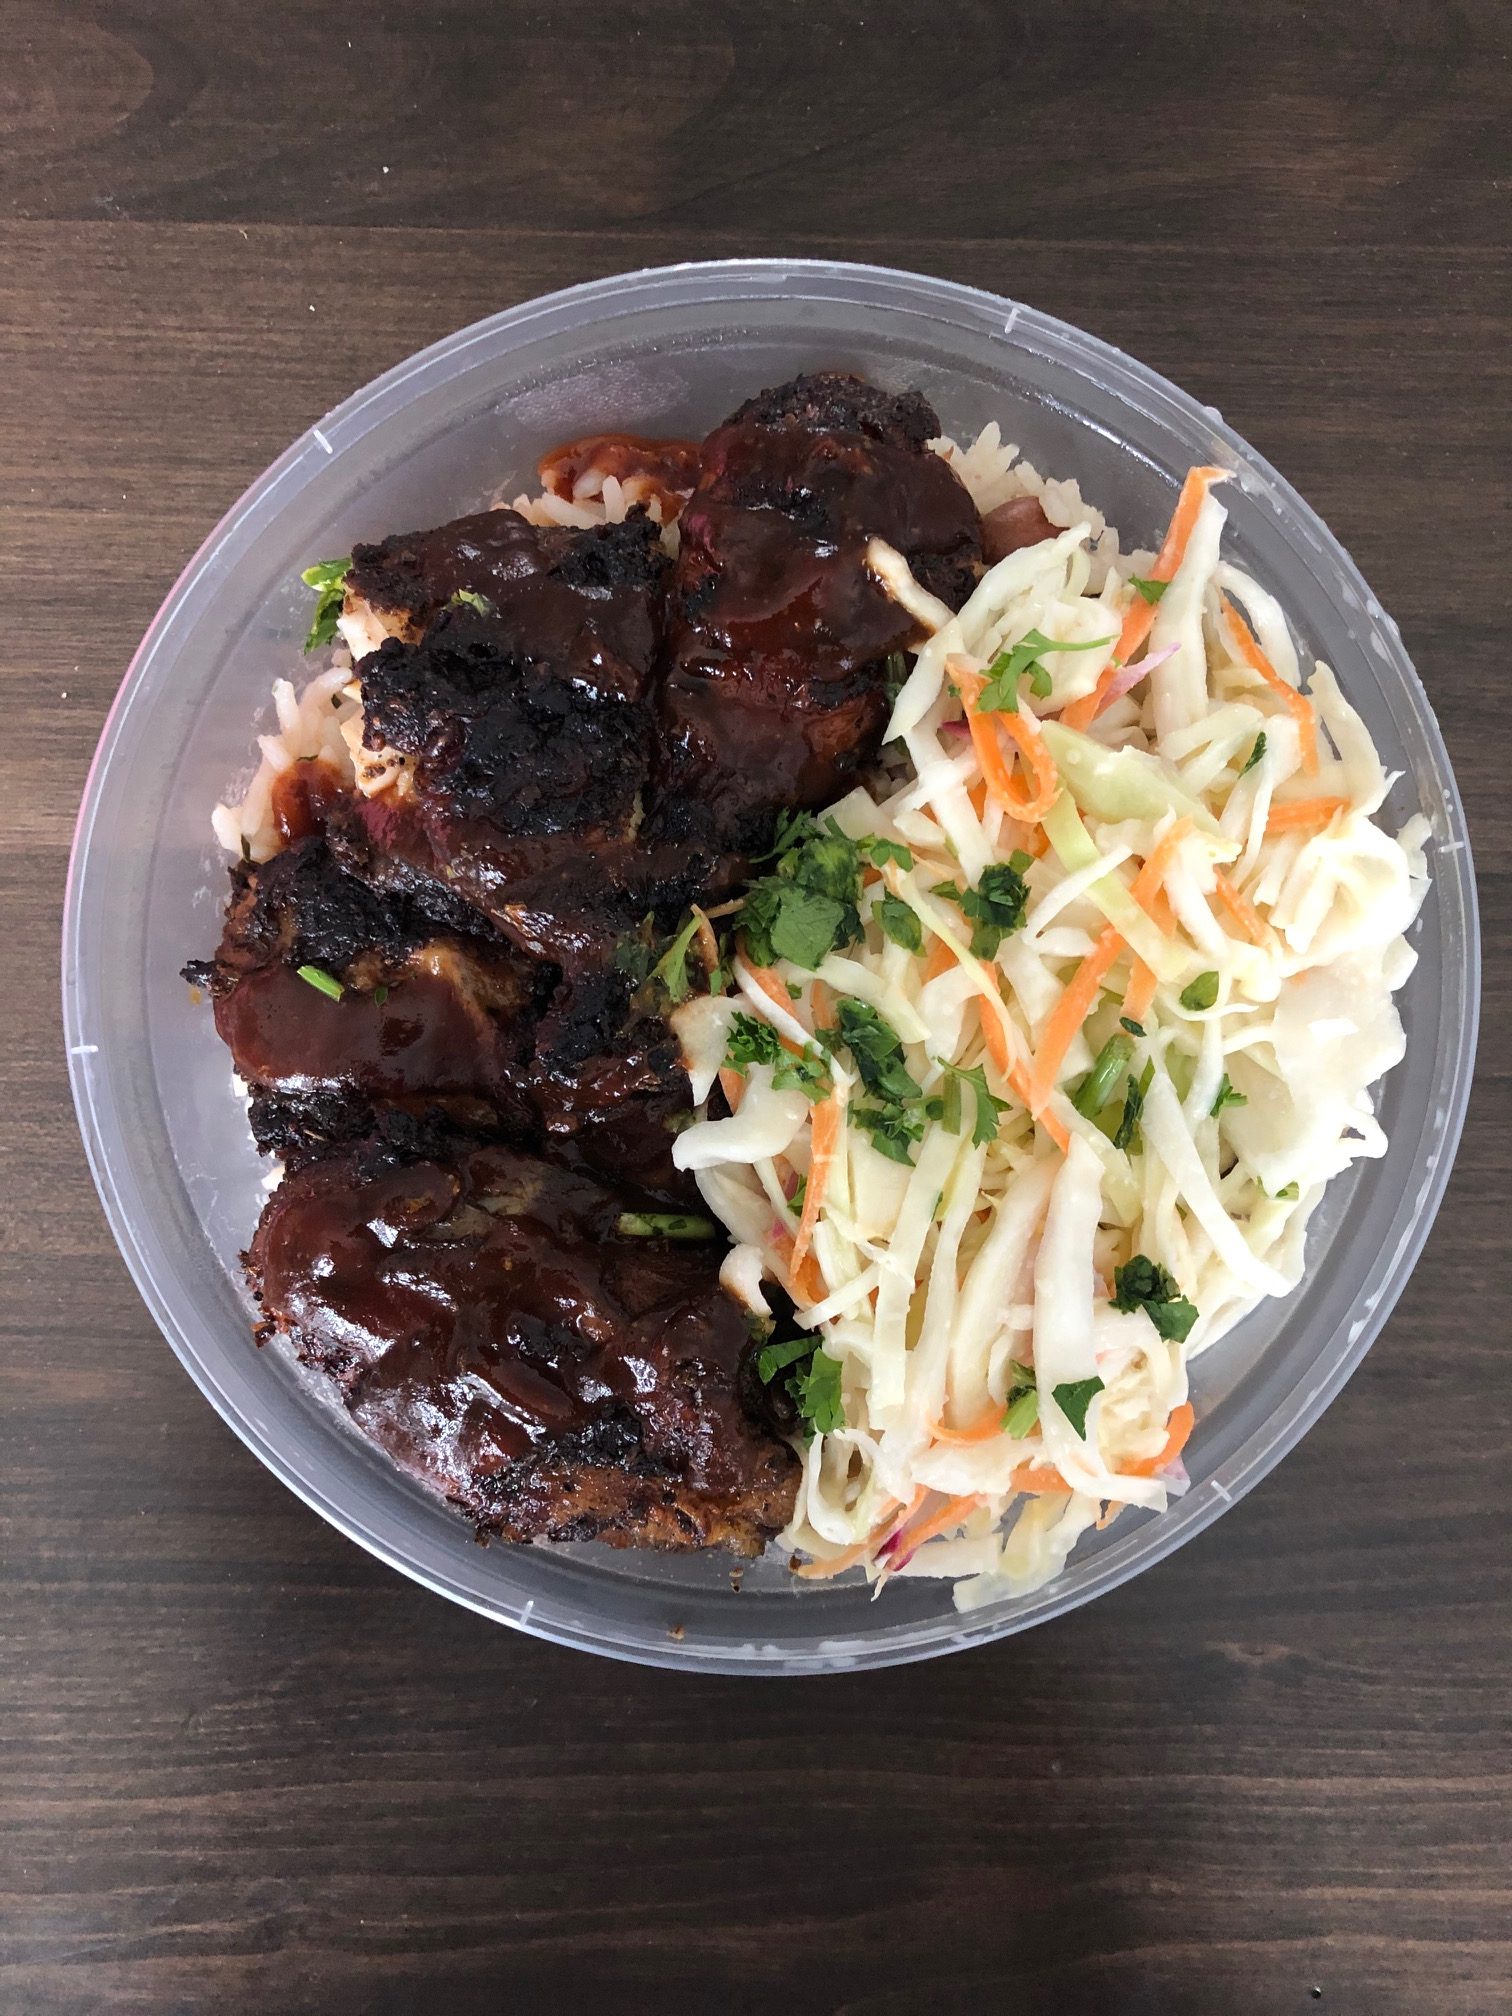 Madame Marie’s Weekly Roundup: Toronto’s Best Takeout and Delivery During COVID-19 – April 16, 2020